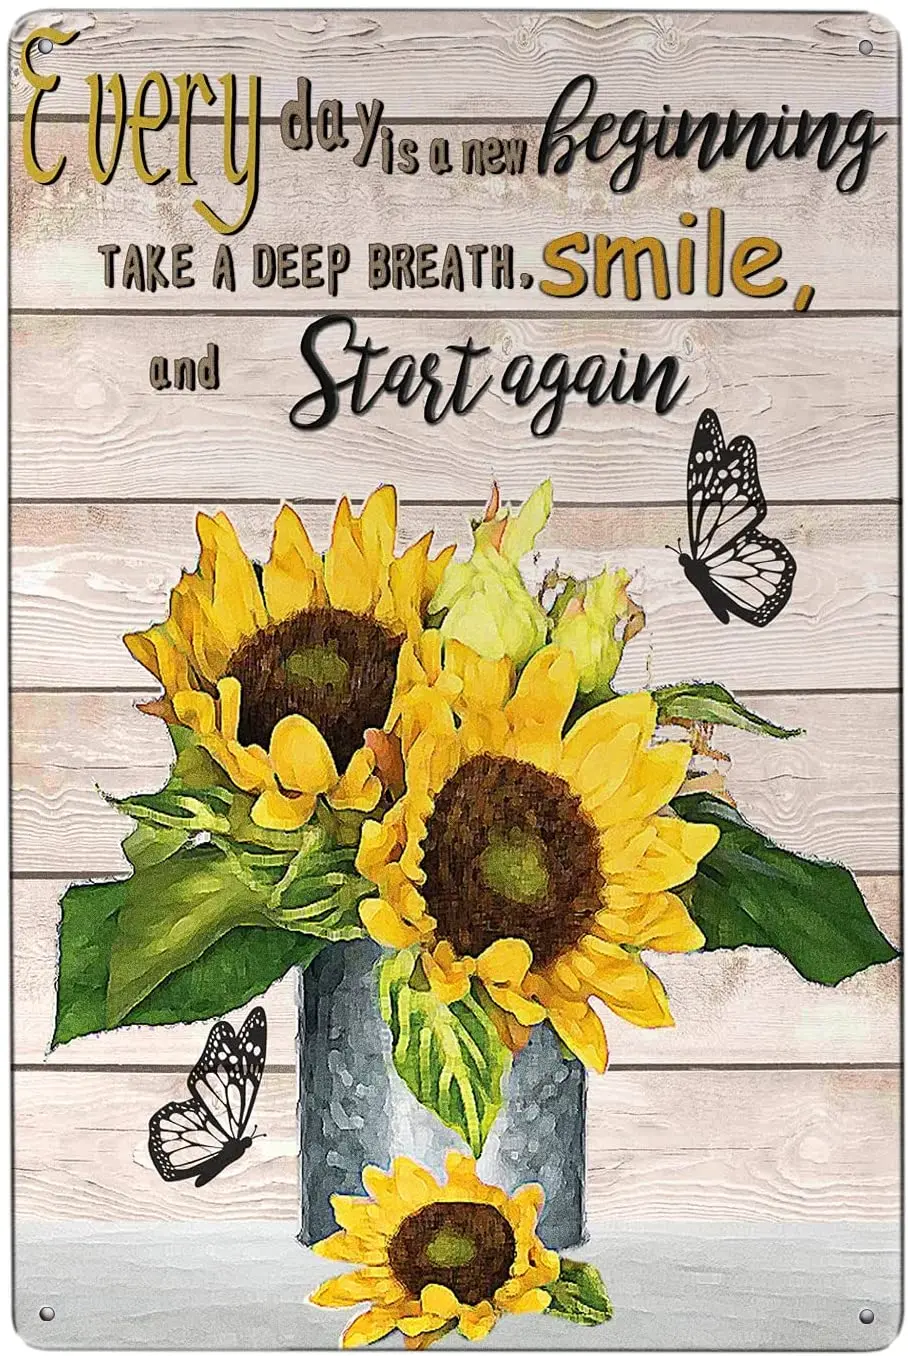 

Bar Decor for Home The beautiful sunflowers every day is a new beginning Vintage Tin Bar Sign Country Farm Kitchen garden sign